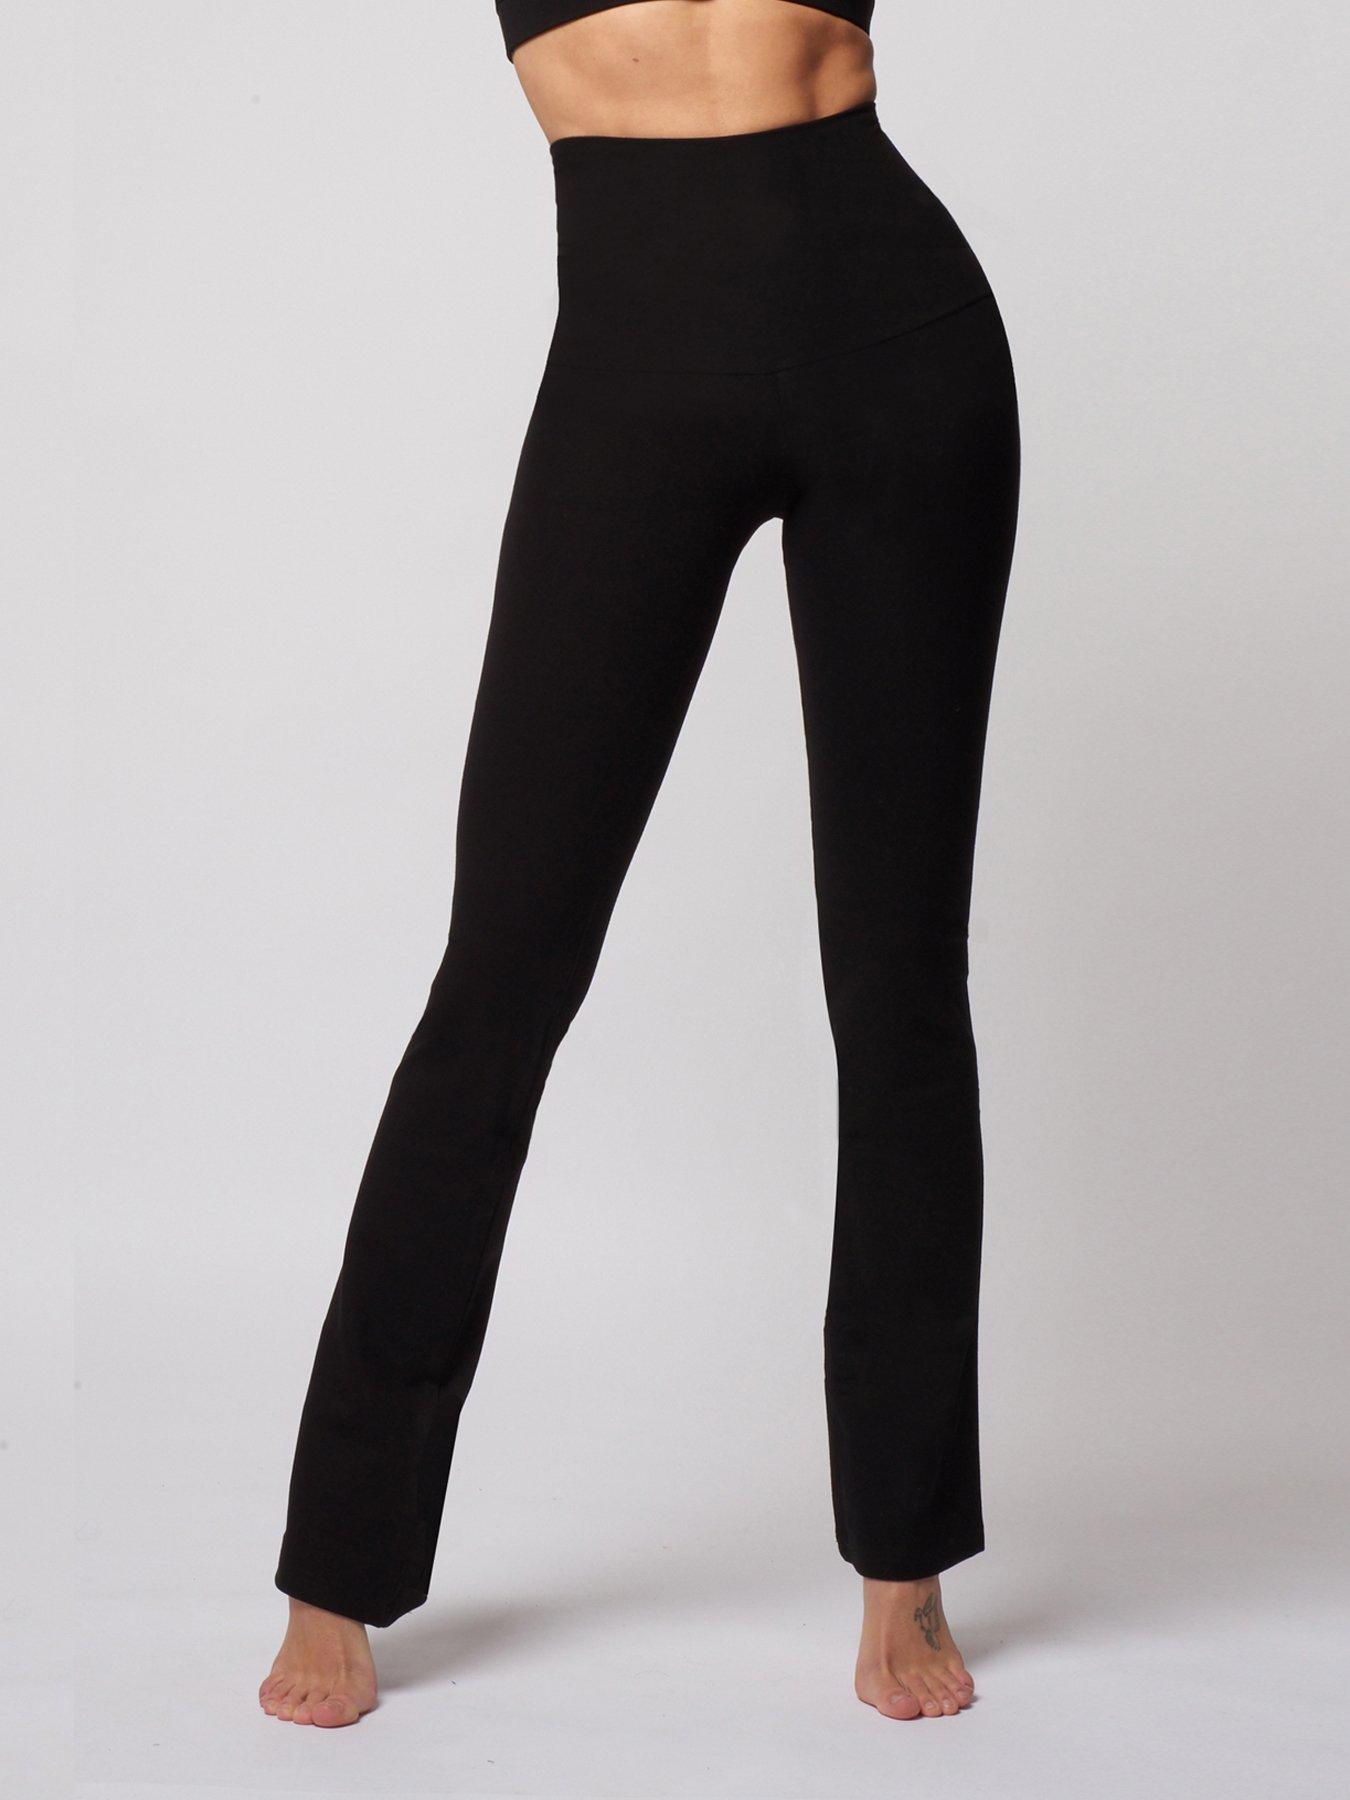 Buy TLC Sport, Super High Waisted Leggings for Women with Tummy Control, Extra Strong Compression, Buttery Soft Fabric